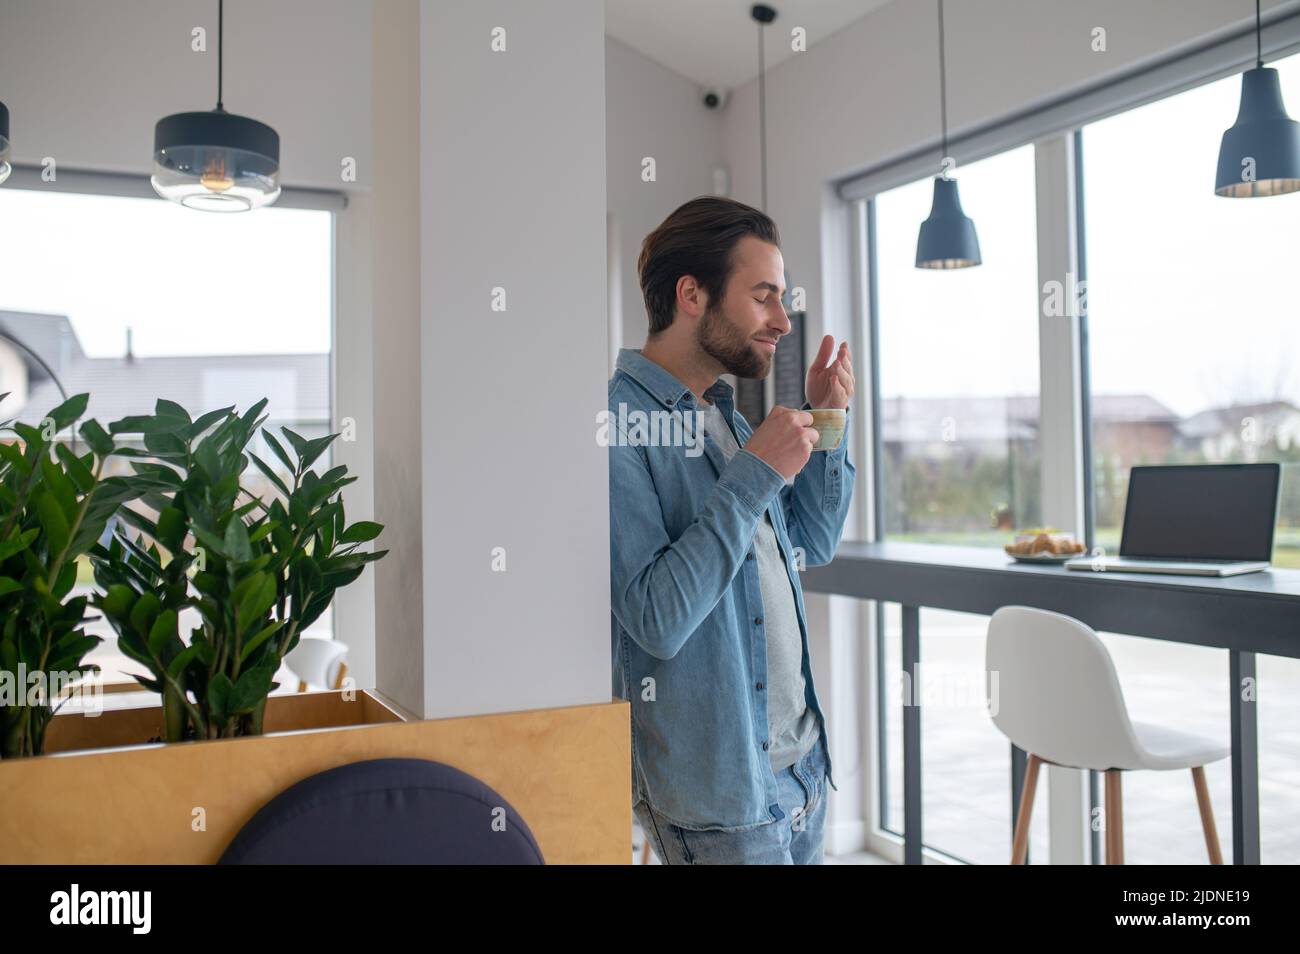 Man holding cup inhaling aroma of coffee Stock Photo